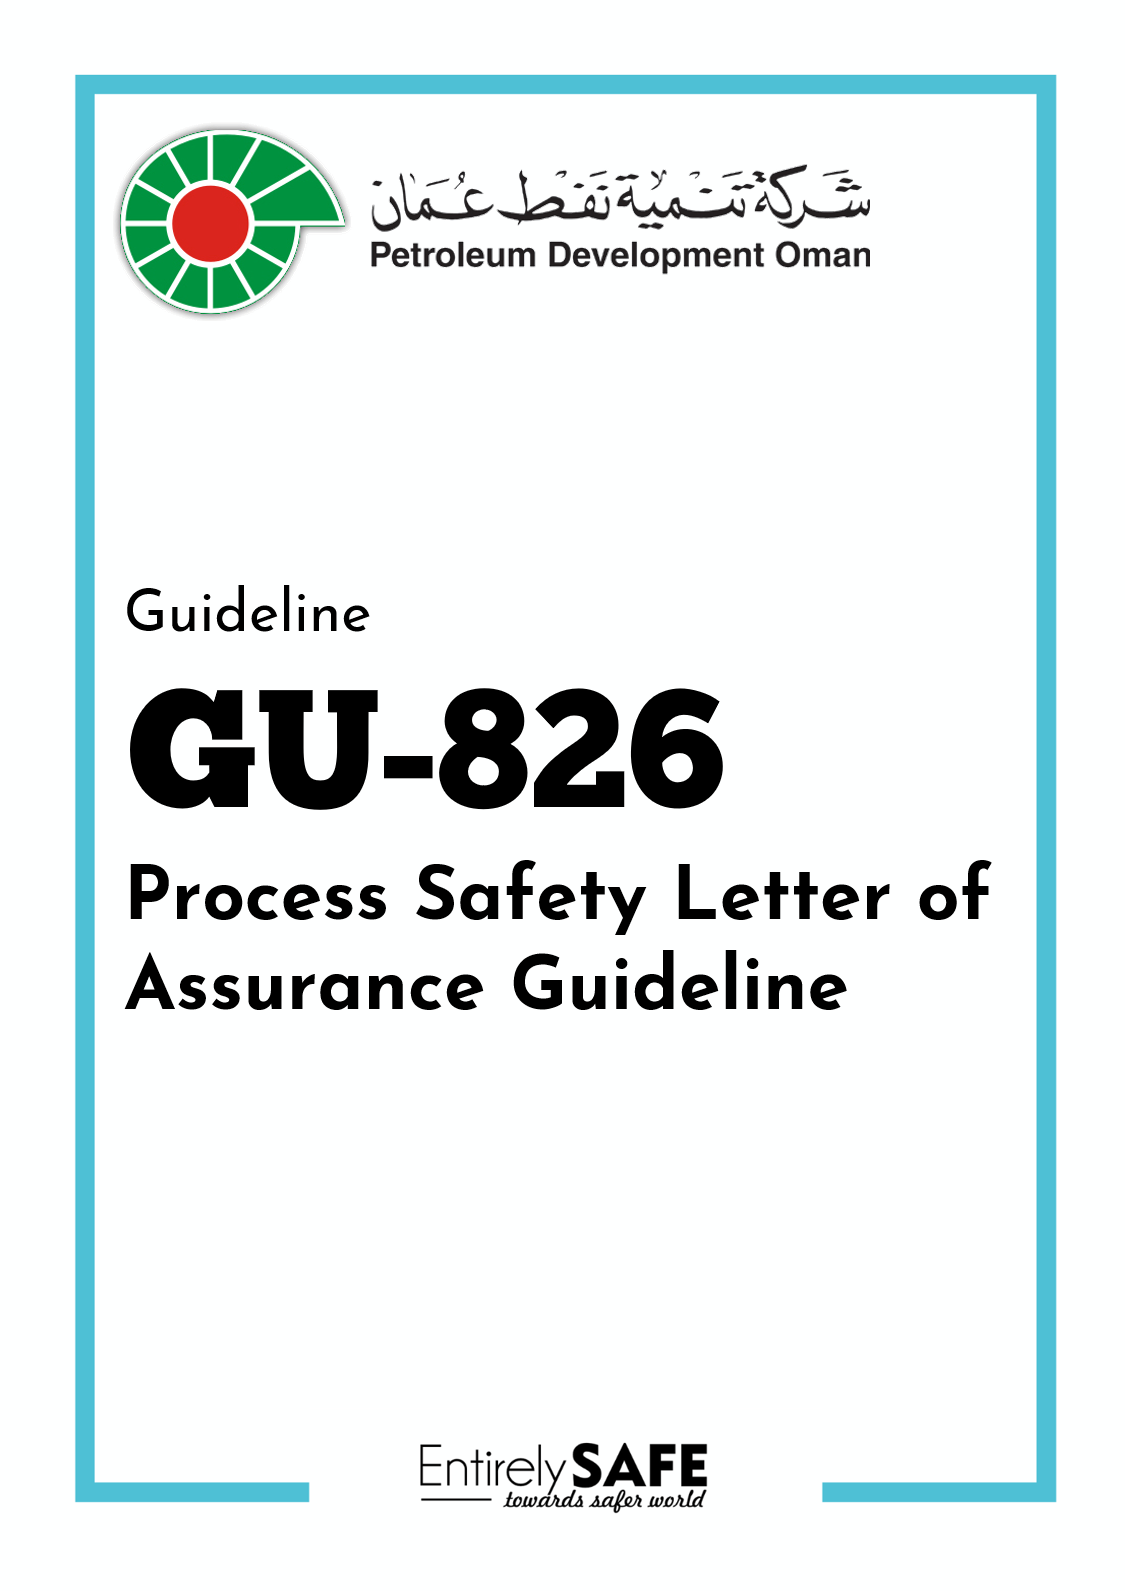 GU-826-Process-Safety-Letter-of-Assurance-Guideline-PDO-download